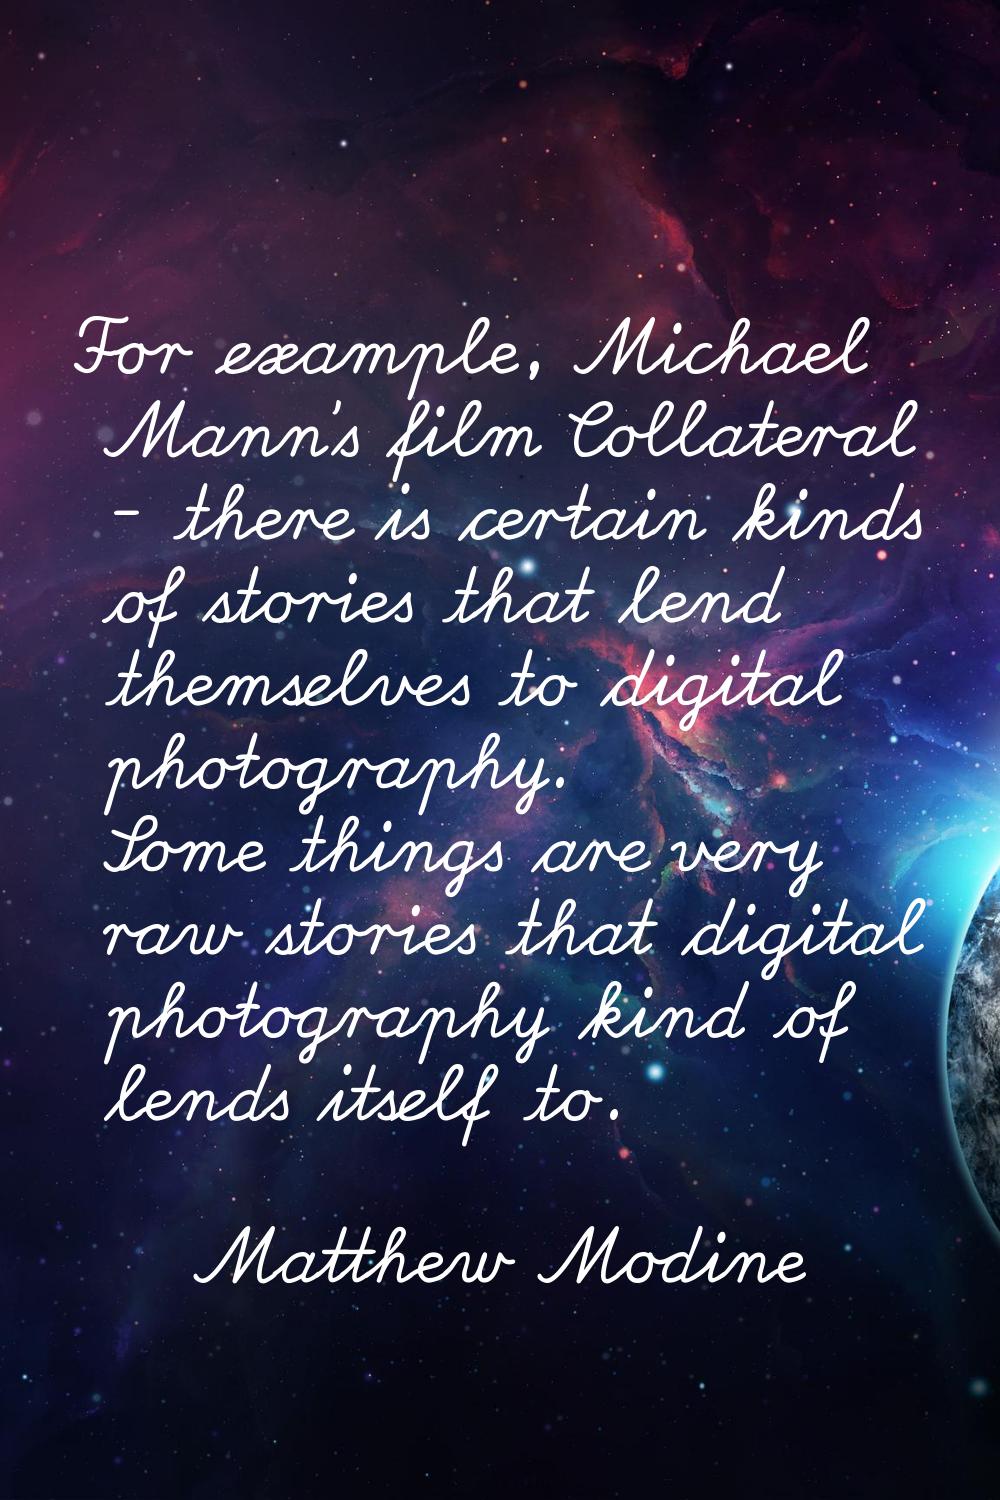 For example, Michael Mann's film Collateral - there is certain kinds of stories that lend themselve